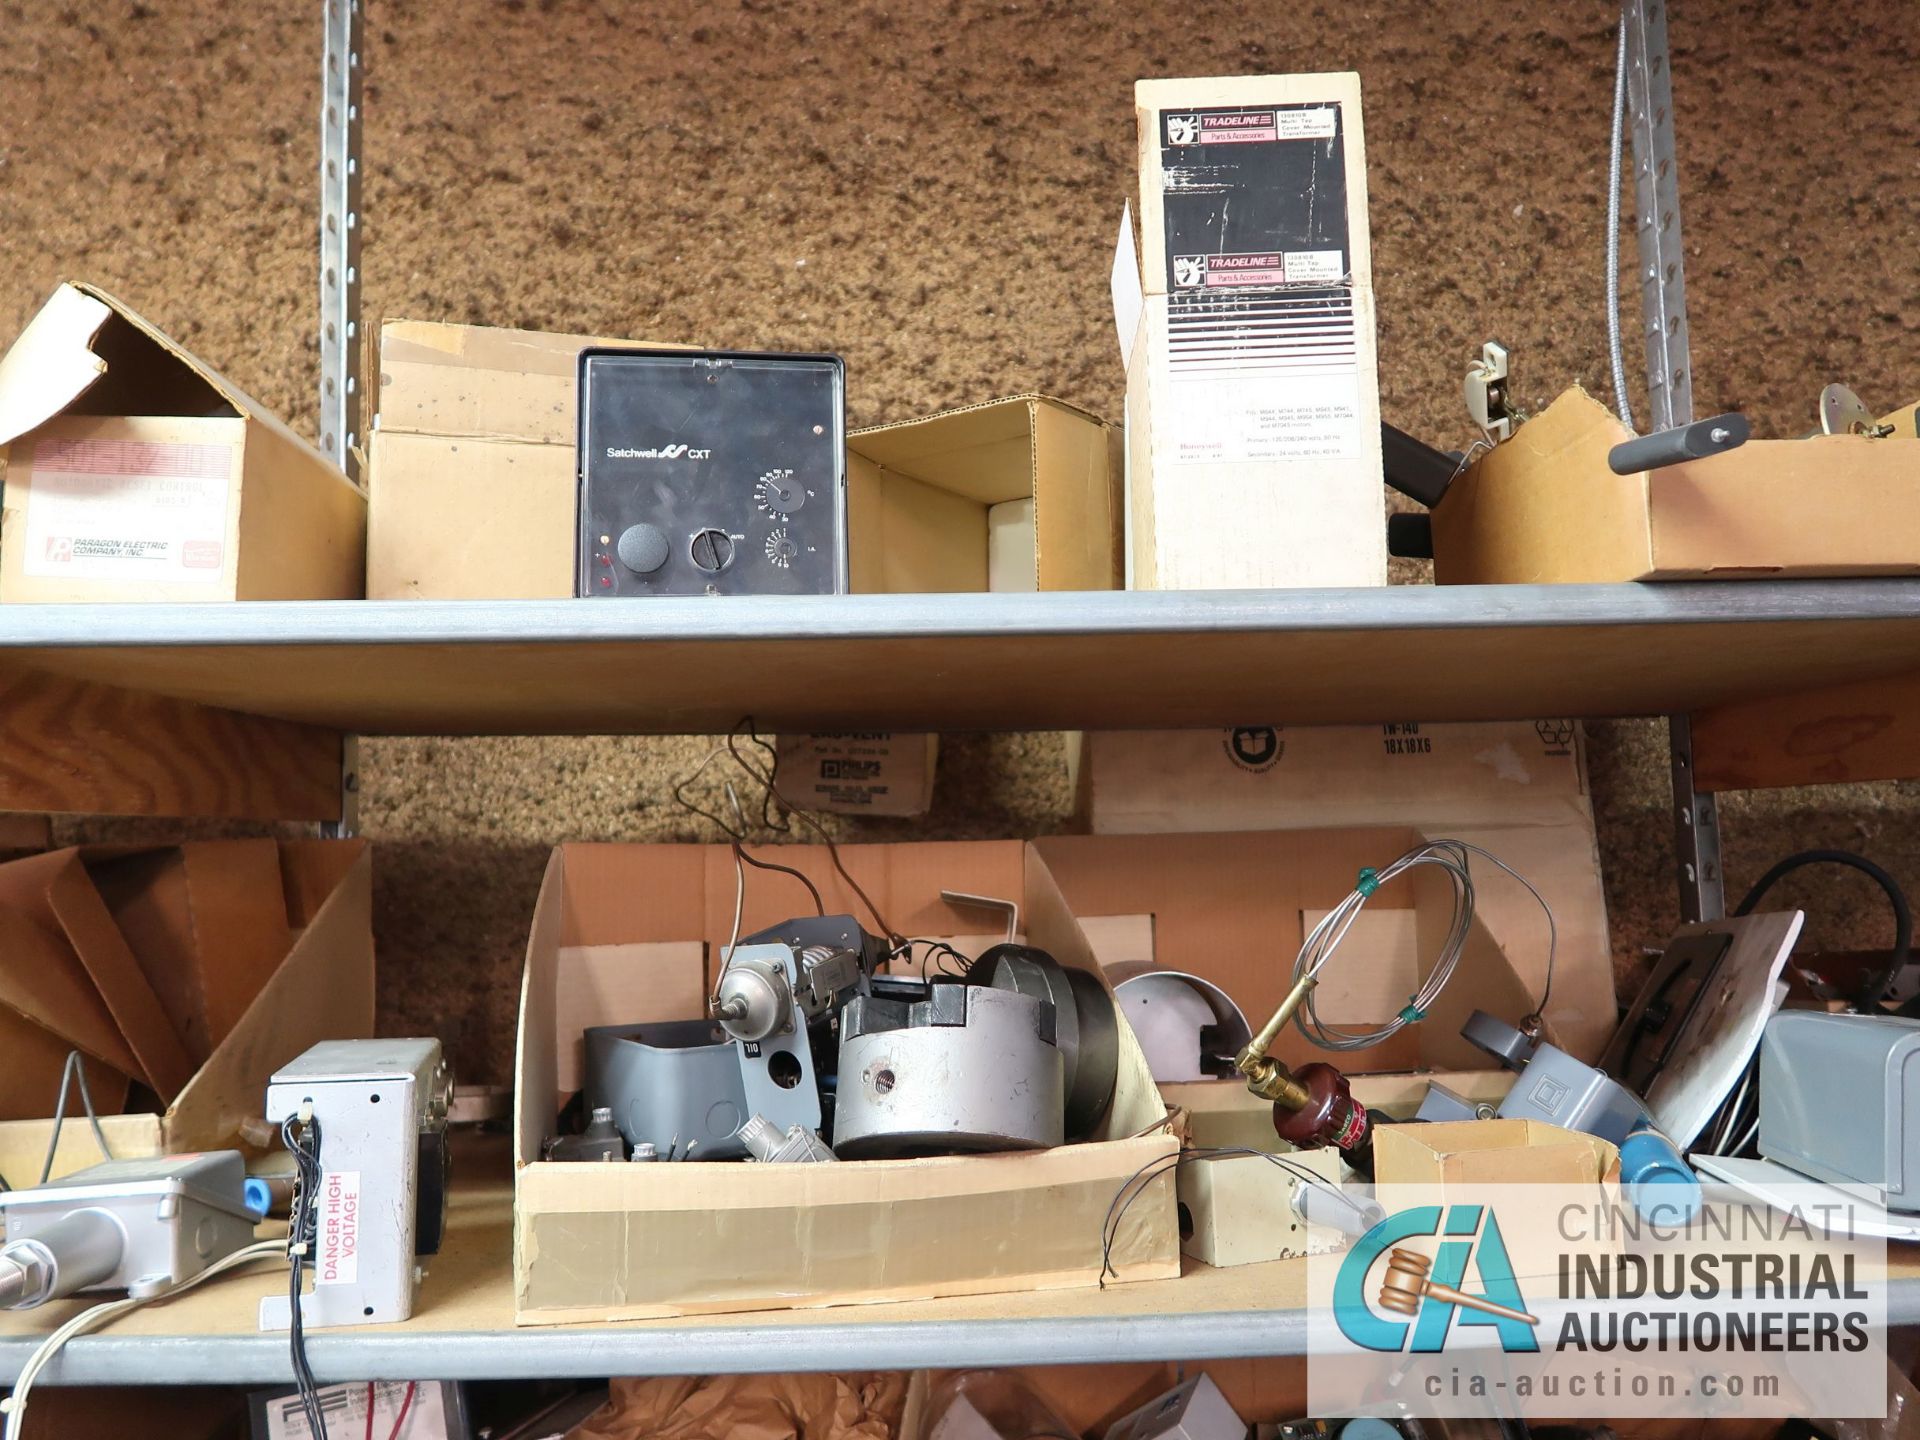 CONTENTS OF (16) SHELVES INCLUDING MISCELLANEOUS VALVES, THERMOSTATS, ANALYZERS, ELECTRICAL, CONTROL - Image 20 of 47